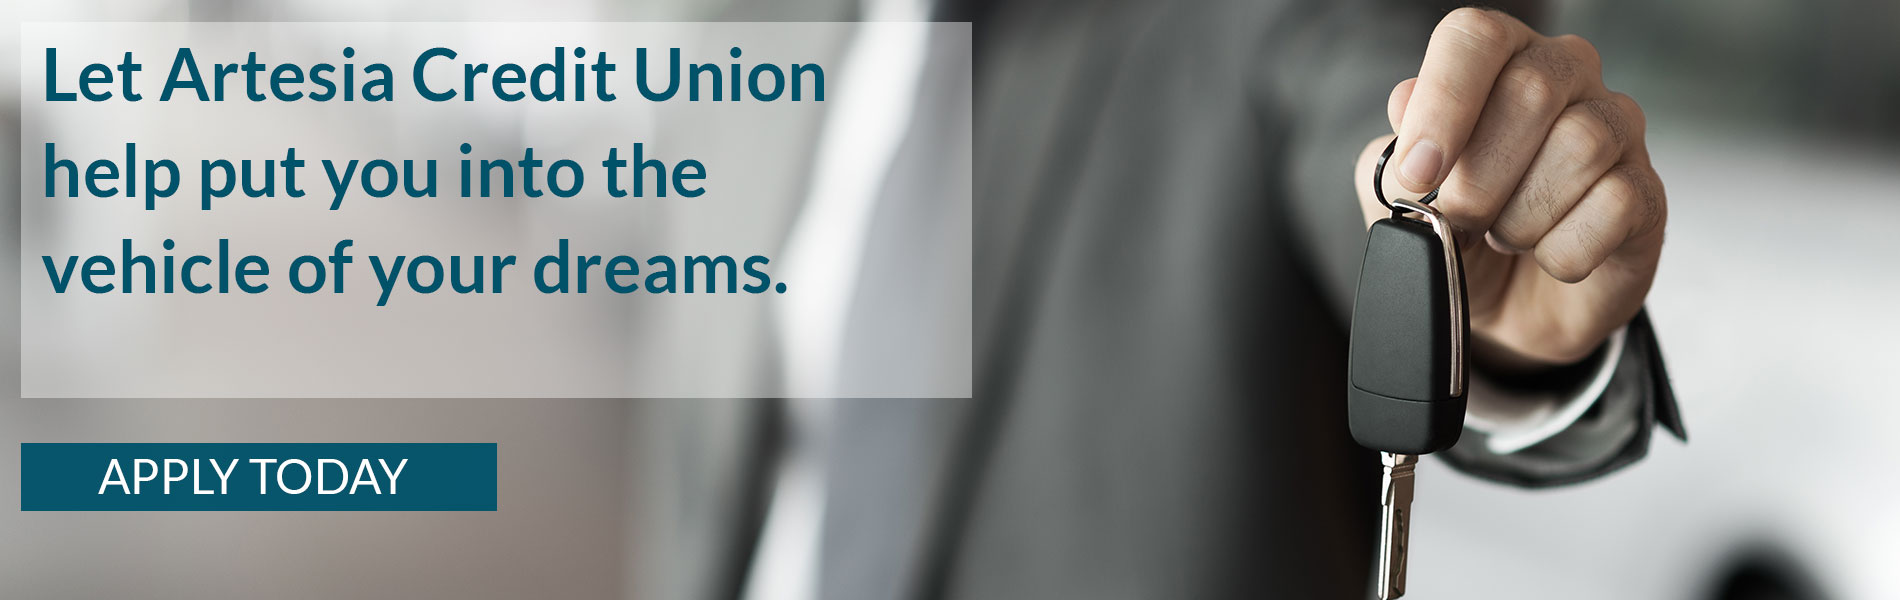 Let Artesia Credit Union help put you into the vehicle of your dreams. Apply today.